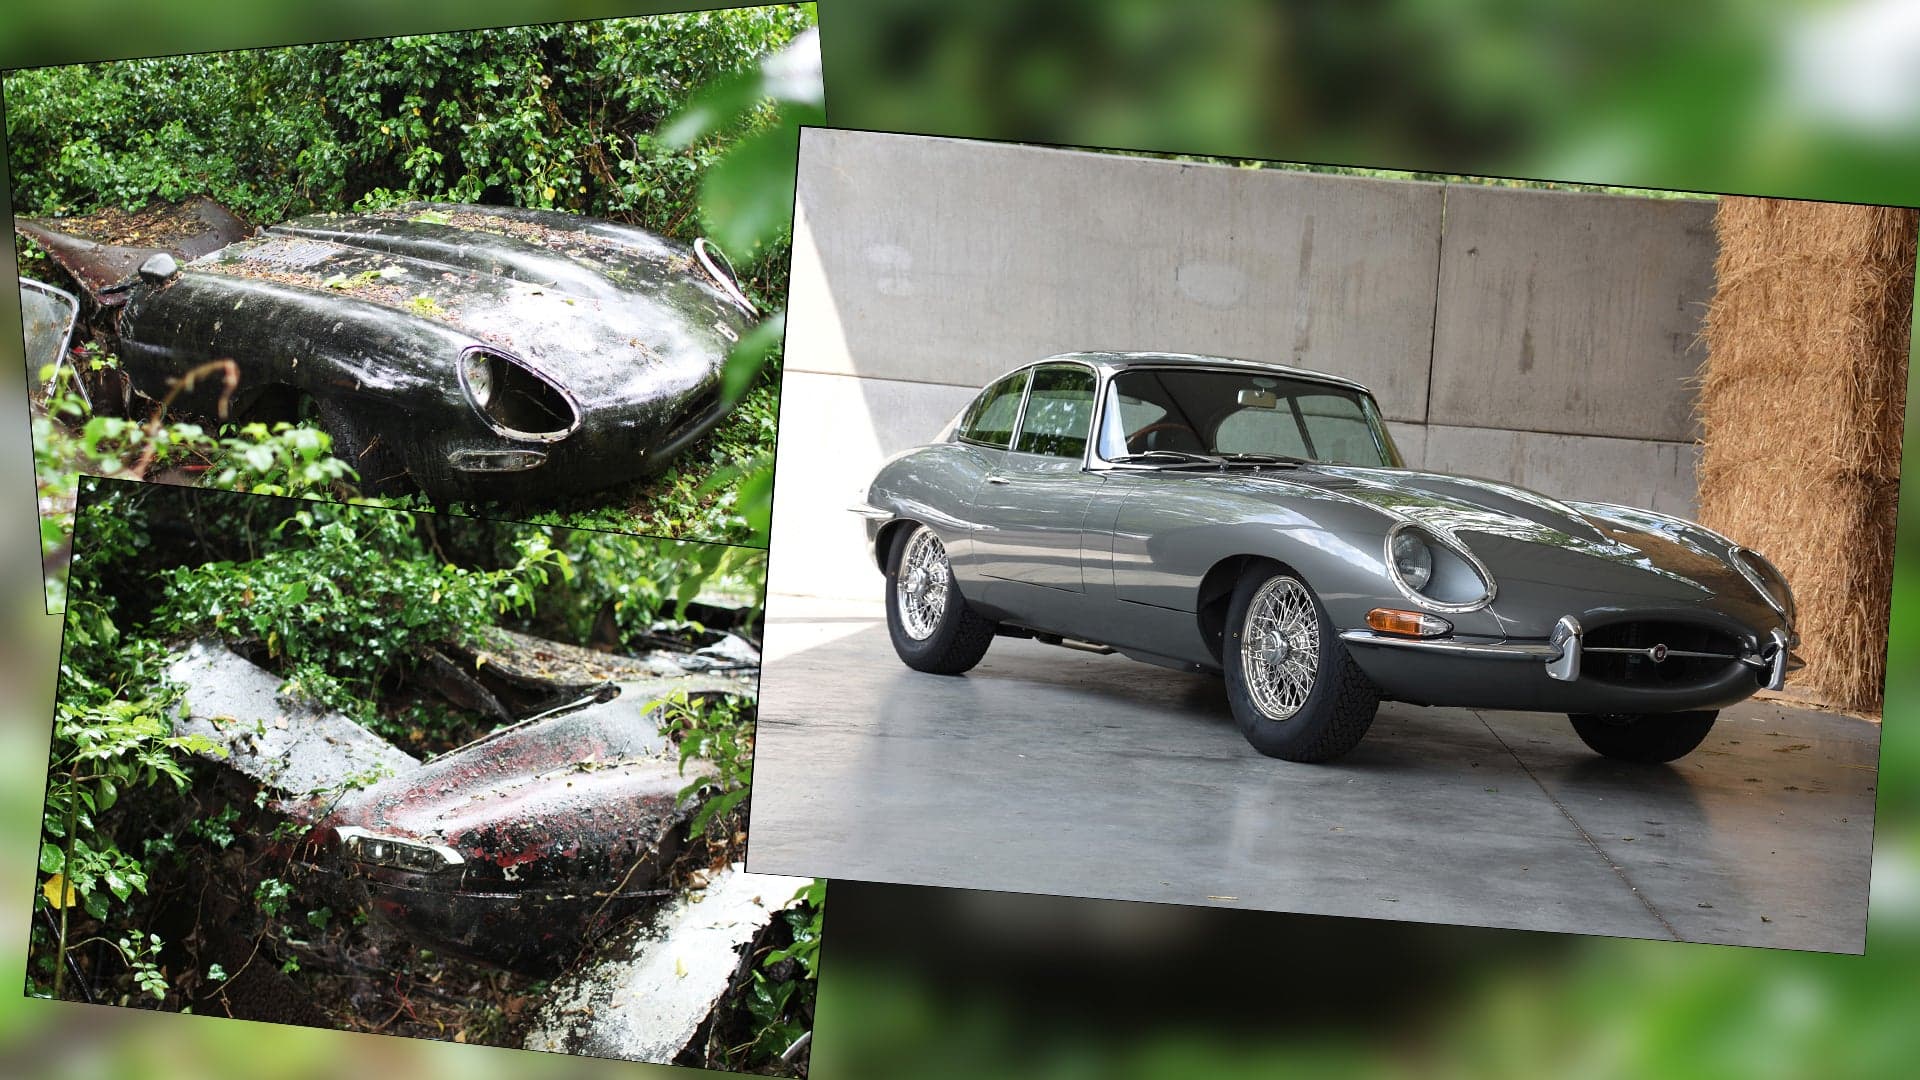 This 1964 Jaguar E-Type Went From Forest-Find To $100,000 Classic